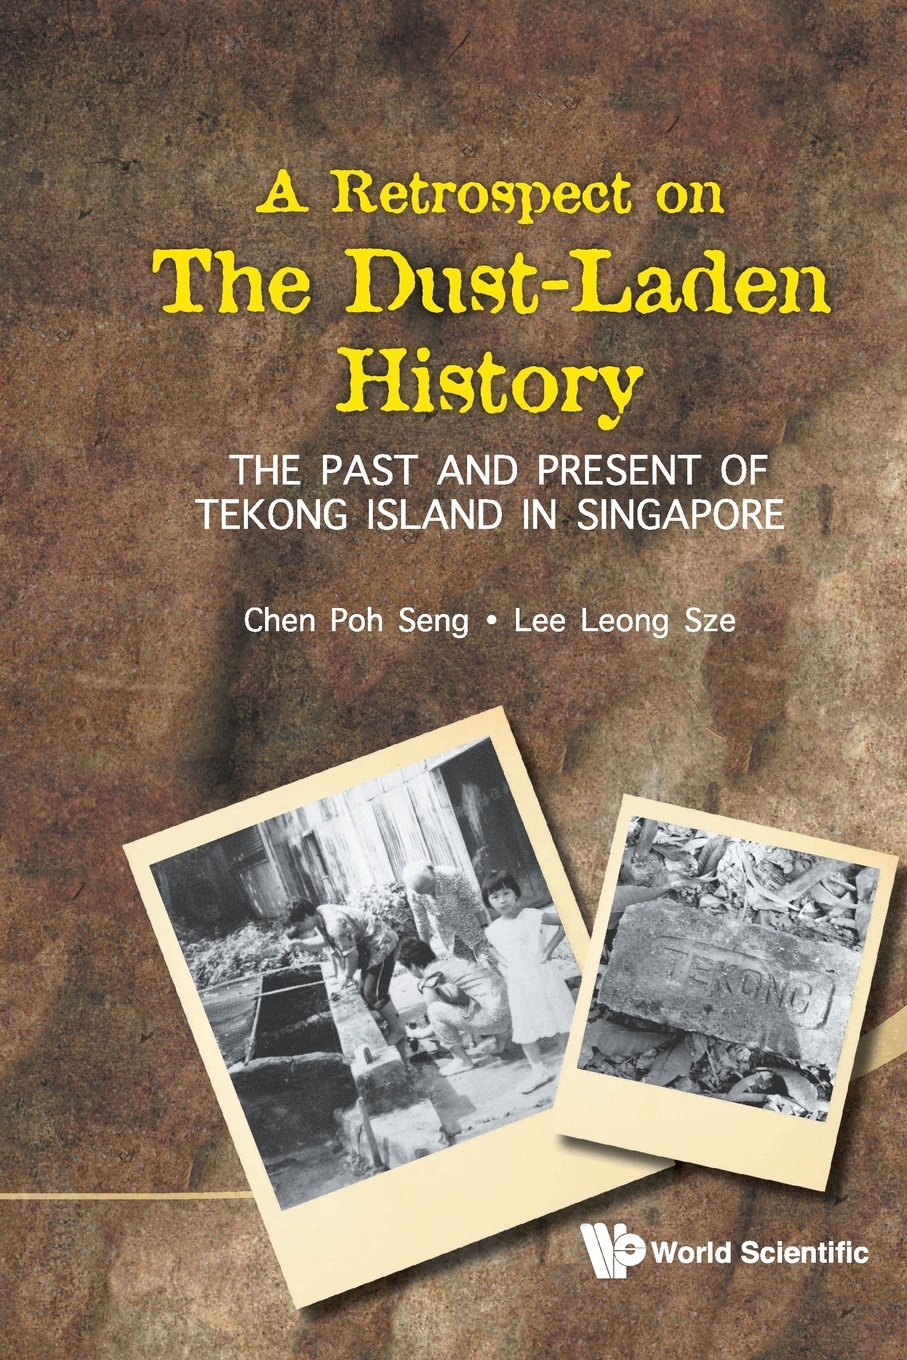 RETROSPECT ON THE DUST-LADEN HISTORY, A. THE PAST AND PRESENT OF TEKONG ISLAND IN SINGAPORE